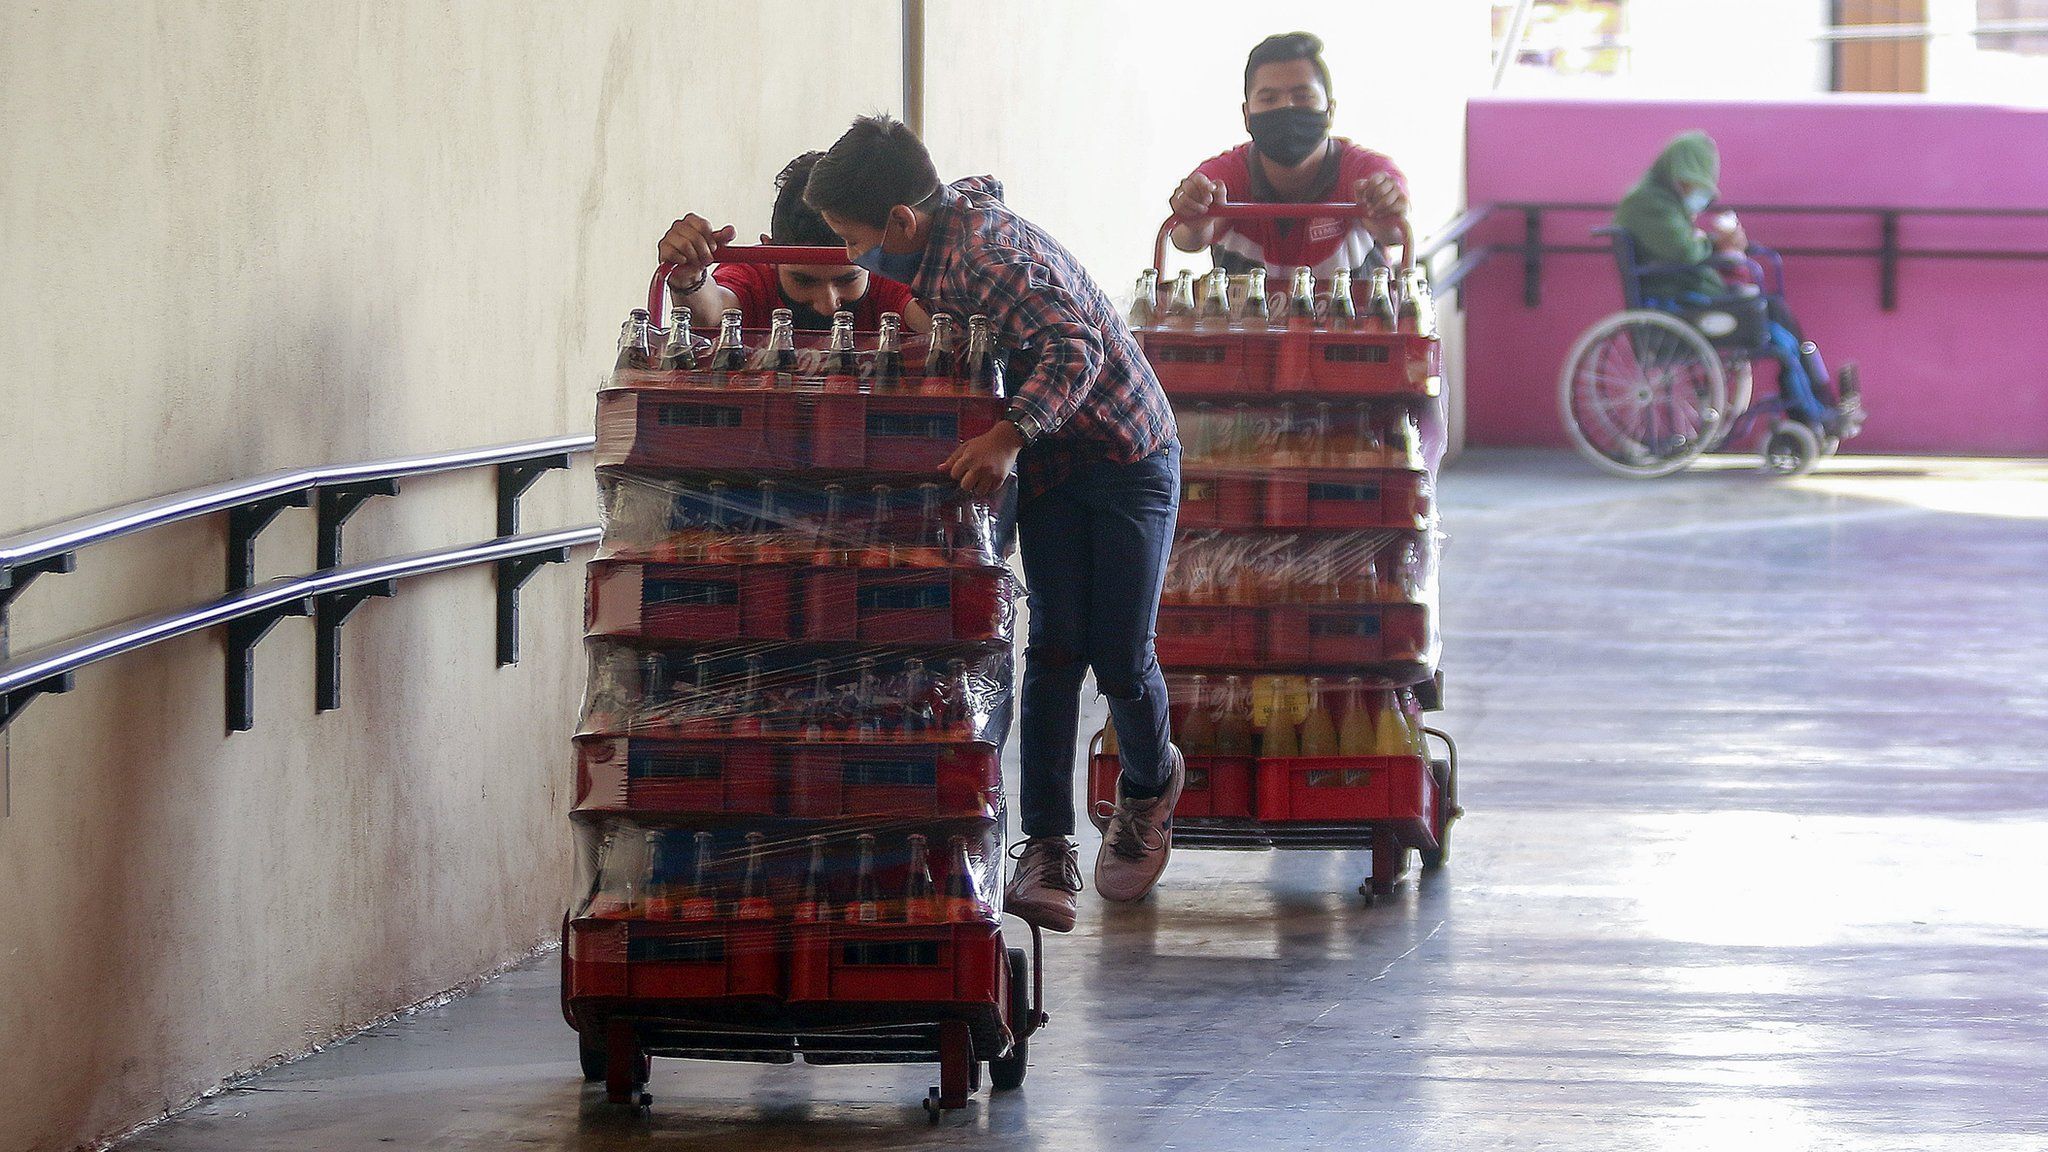 Workers carry sodas while wearing protective masks on May 9, 2020 in Queretaro , Mexico.